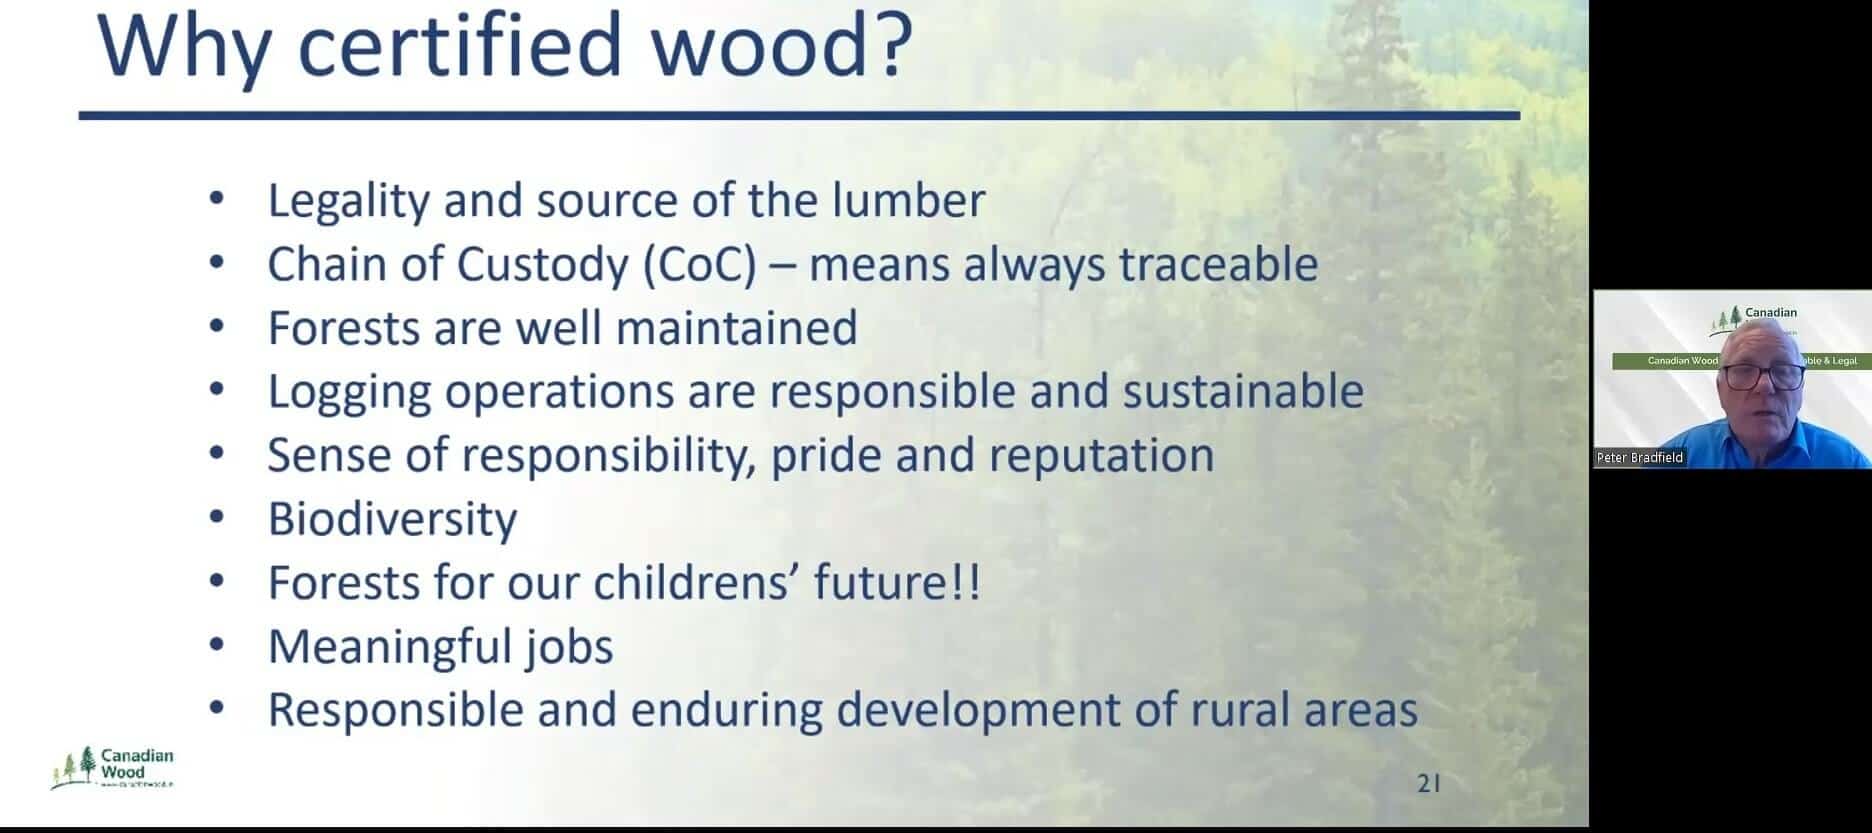 informational slide explaining the benefits of certified sustainably produced wood